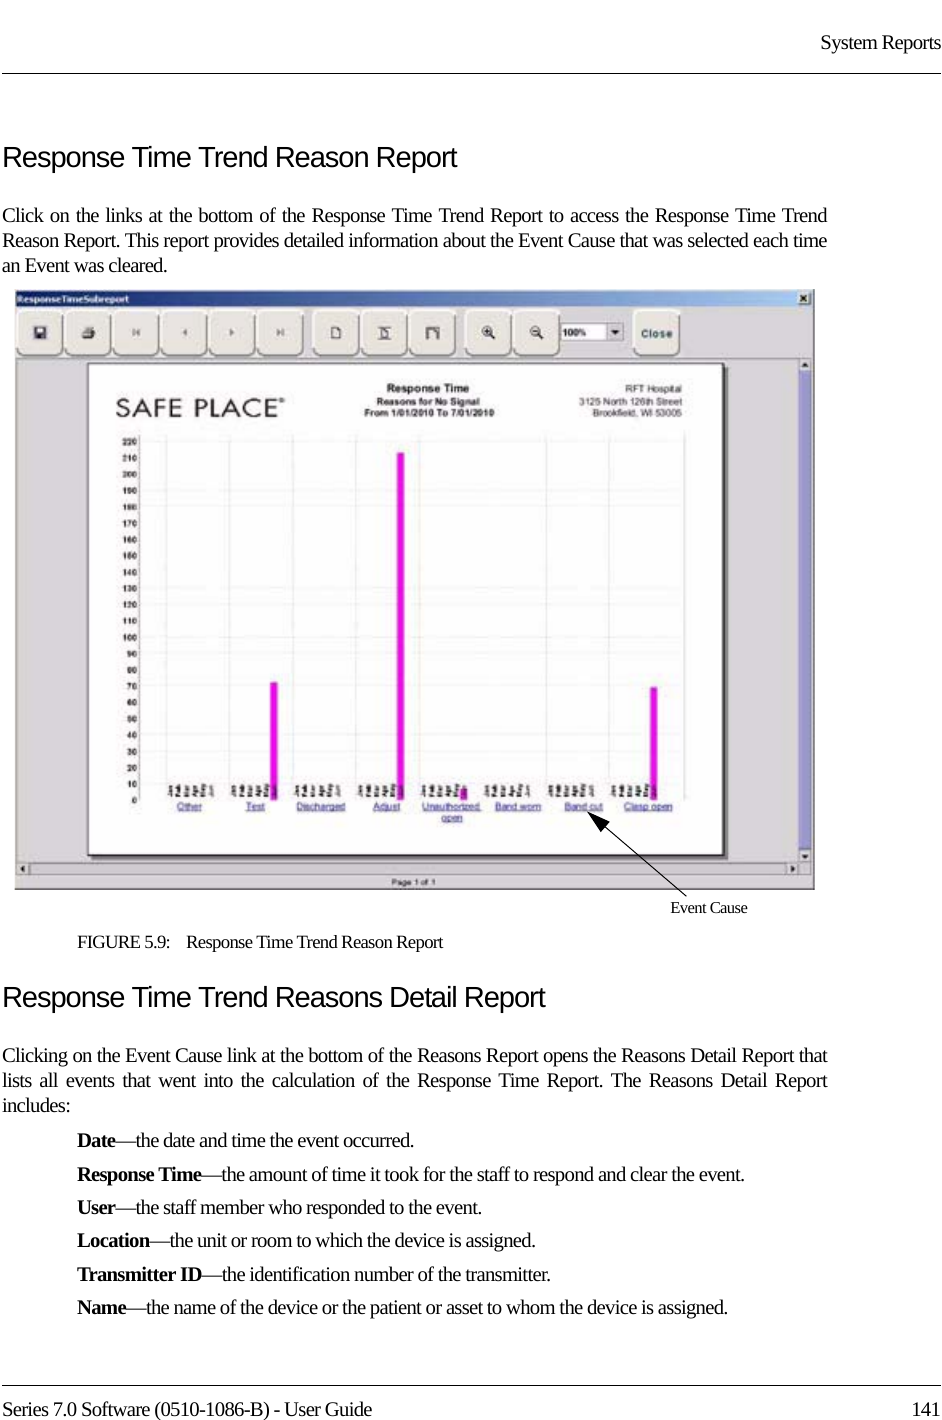 Series 7.0 Software (0510-1086-B) - User Guide  141System ReportsResponse Time Trend Reason ReportClick on the links at the bottom of the Response Time Trend Report to access the Response Time Trend Reason Report. This report provides detailed information about the Event Cause that was selected each time an Event was cleared. FIGURE 5.9:    Response Time Trend Reason ReportResponse Time Trend Reasons Detail ReportClicking on the Event Cause link at the bottom of the Reasons Report opens the Reasons Detail Report that lists all events that went into the calculation of the Response Time Report. The Reasons Detail Report includes:Date—the date and time the event occurred.Response Time—the amount of time it took for the staff to respond and clear the event.User—the staff member who responded to the event. Location—the unit or room to which the device is assigned.Transmitter ID—the identification number of the transmitter.Name—the name of the device or the patient or asset to whom the device is assigned.Event Cause